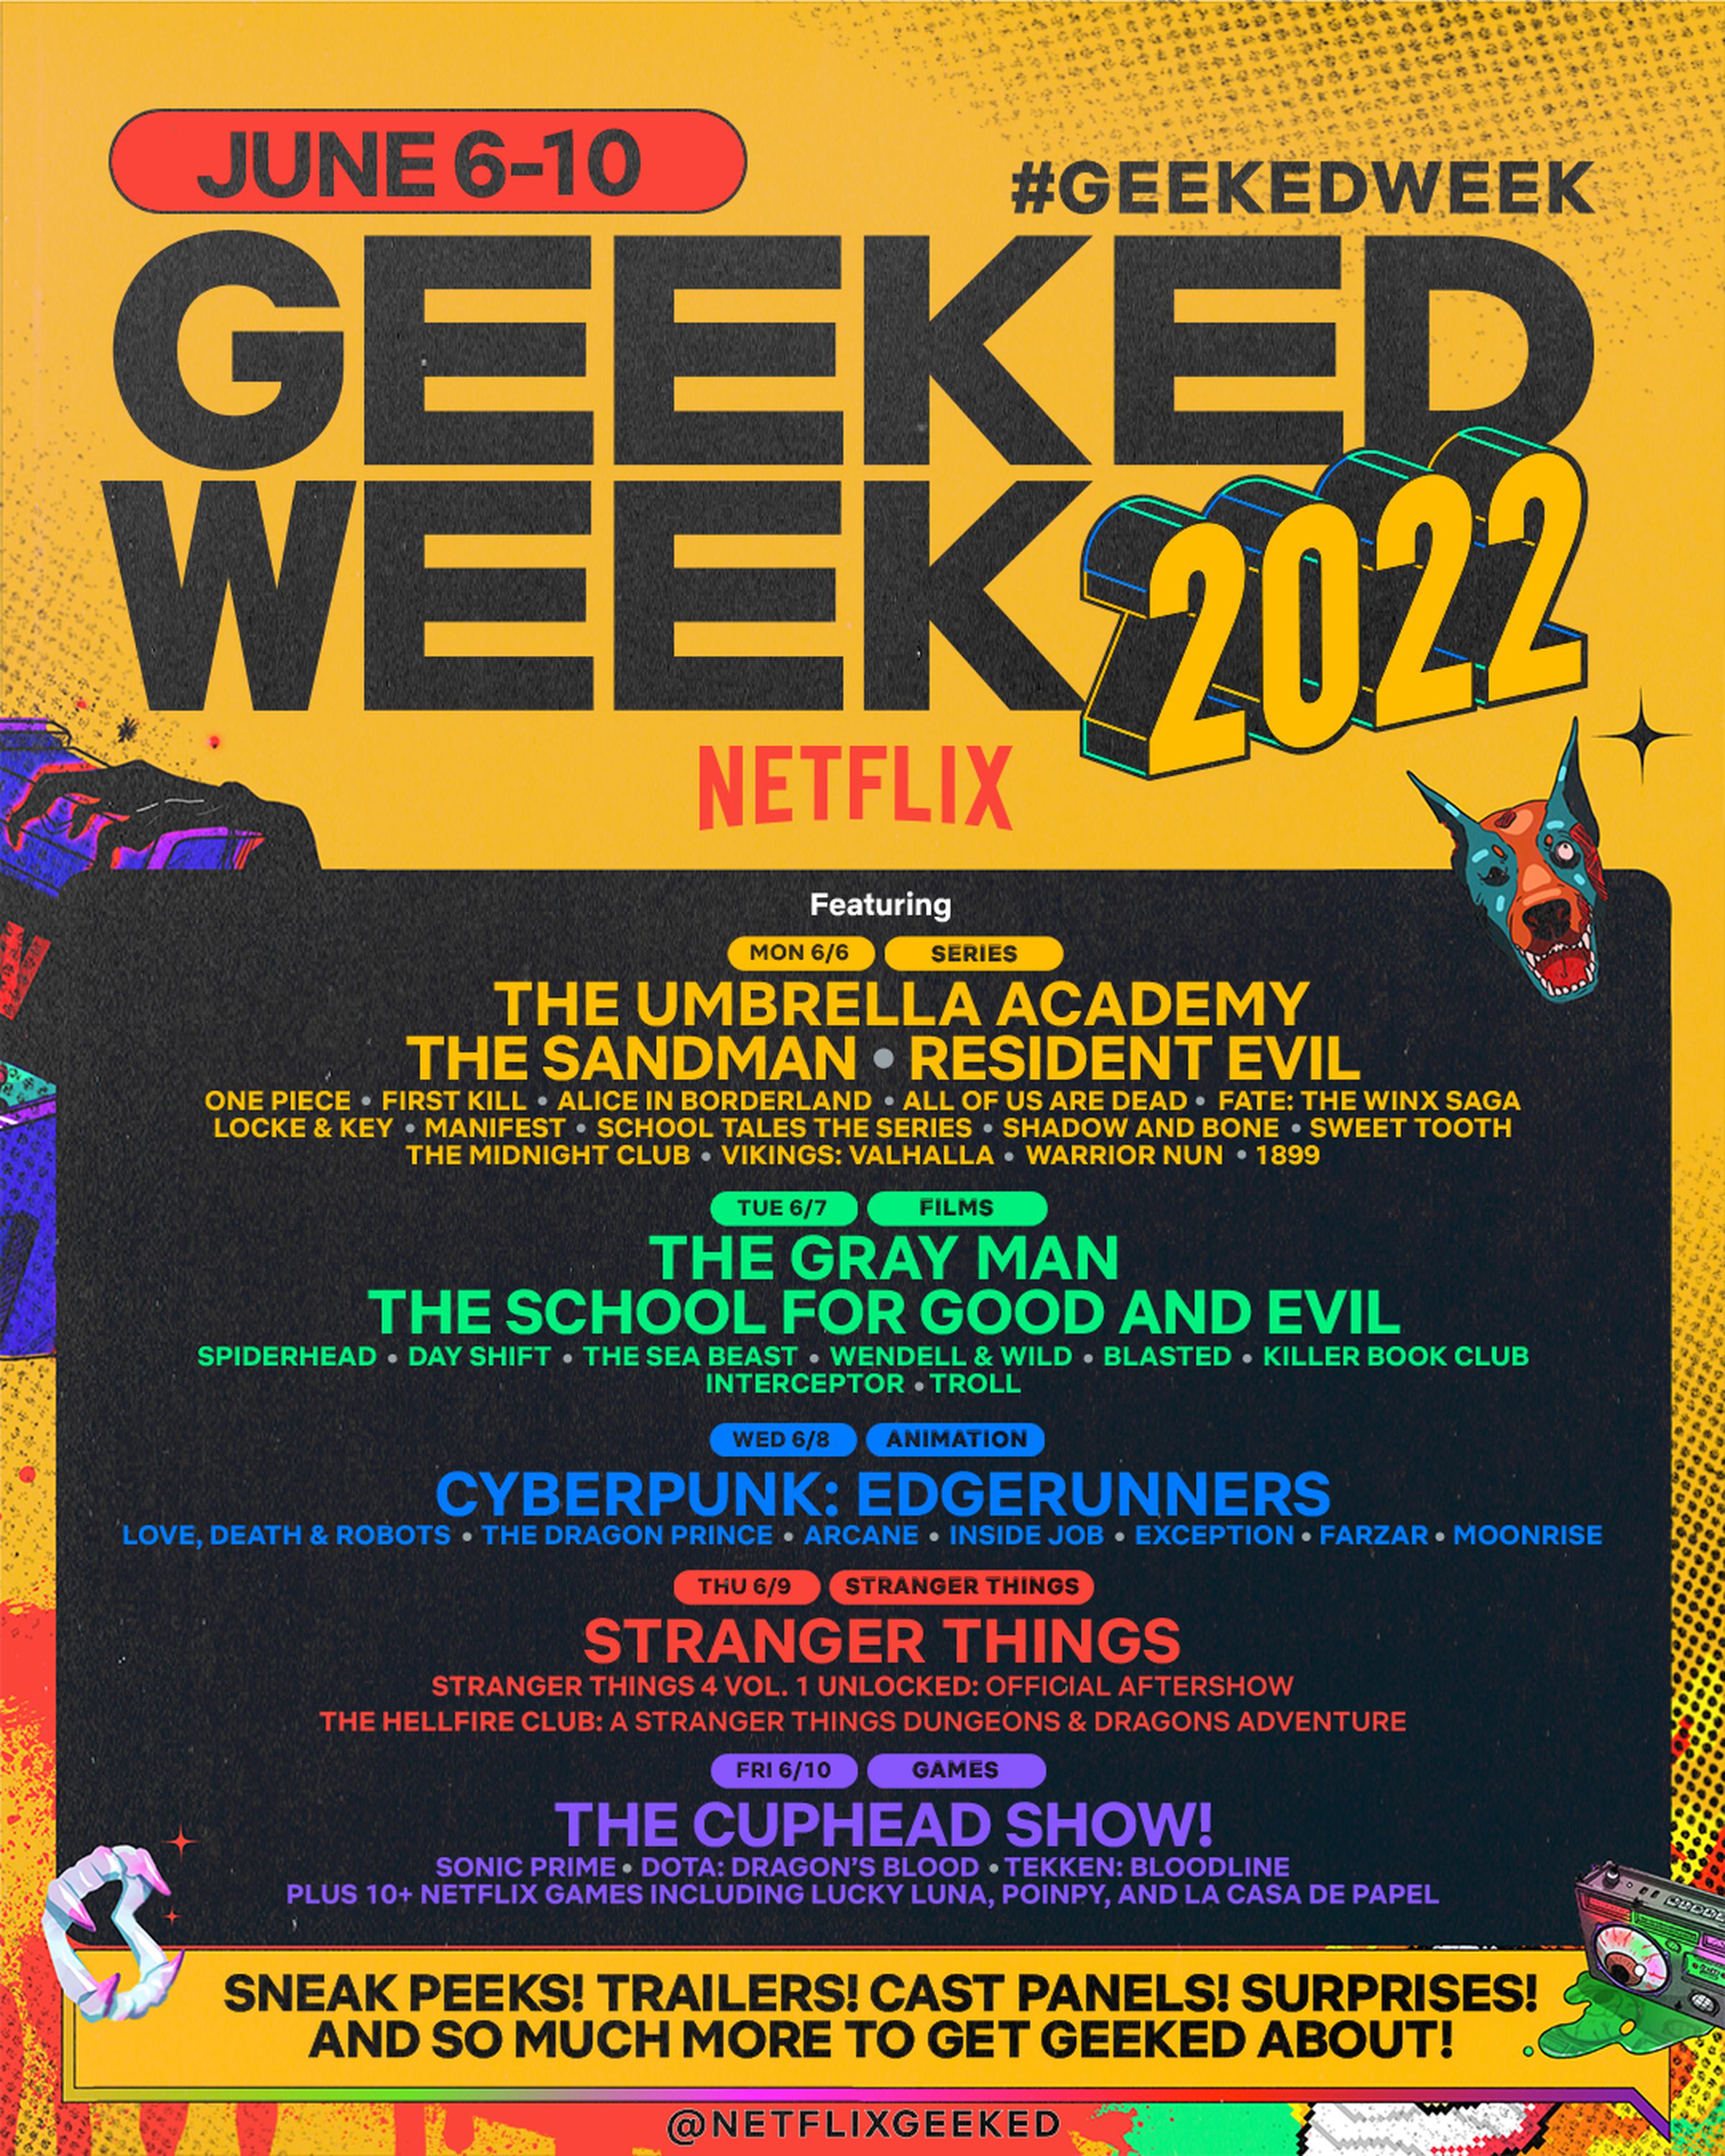 The confirmed line-up for Netflix Geeked Week 2022.